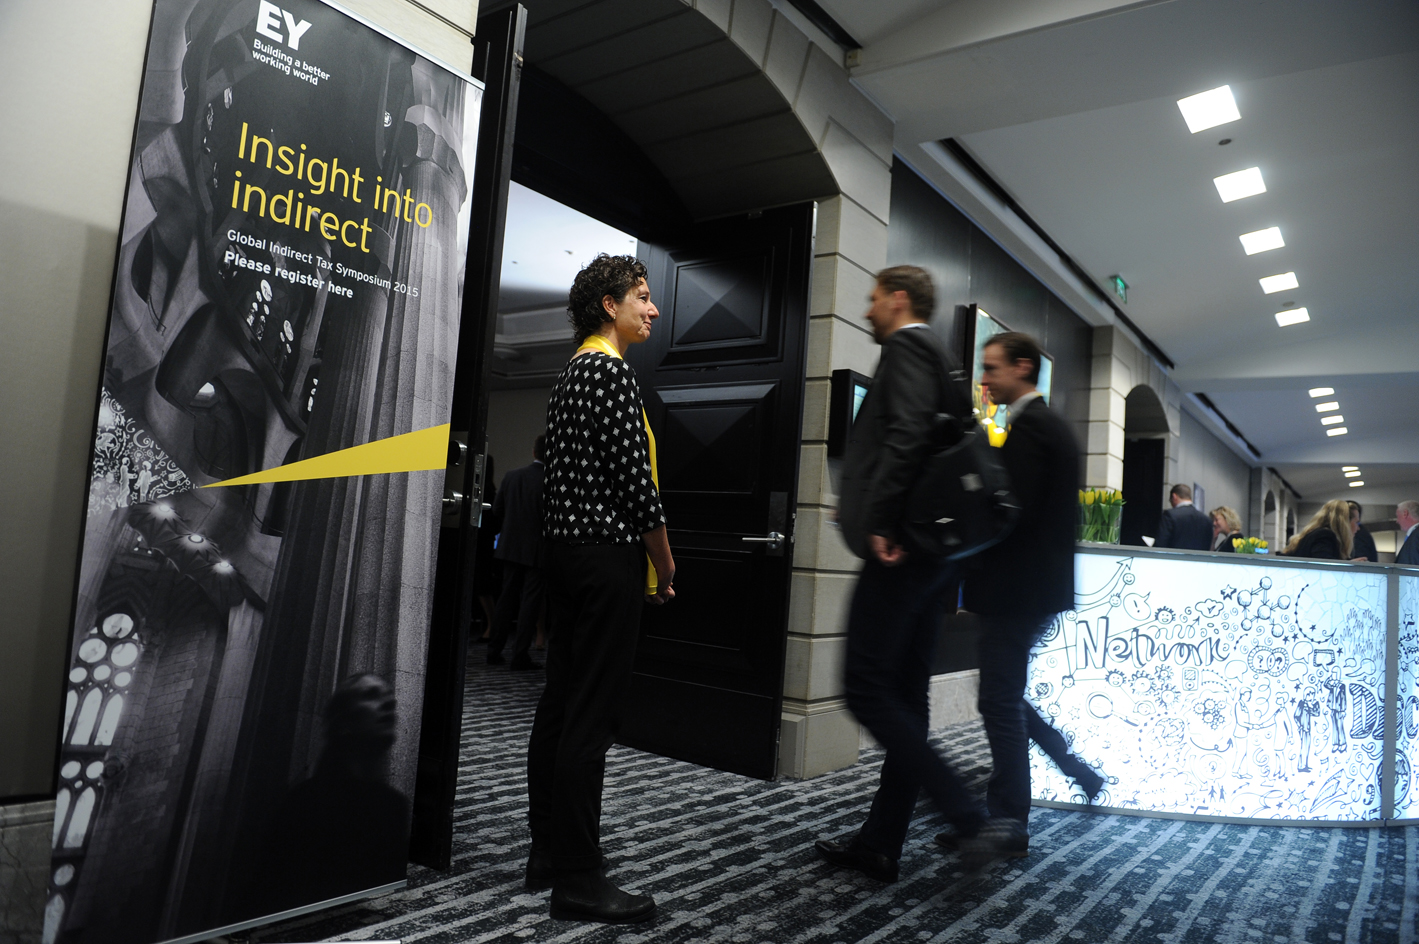 EY 'Insight into indirect' environmental graphics and info desk, Barcelona 2015